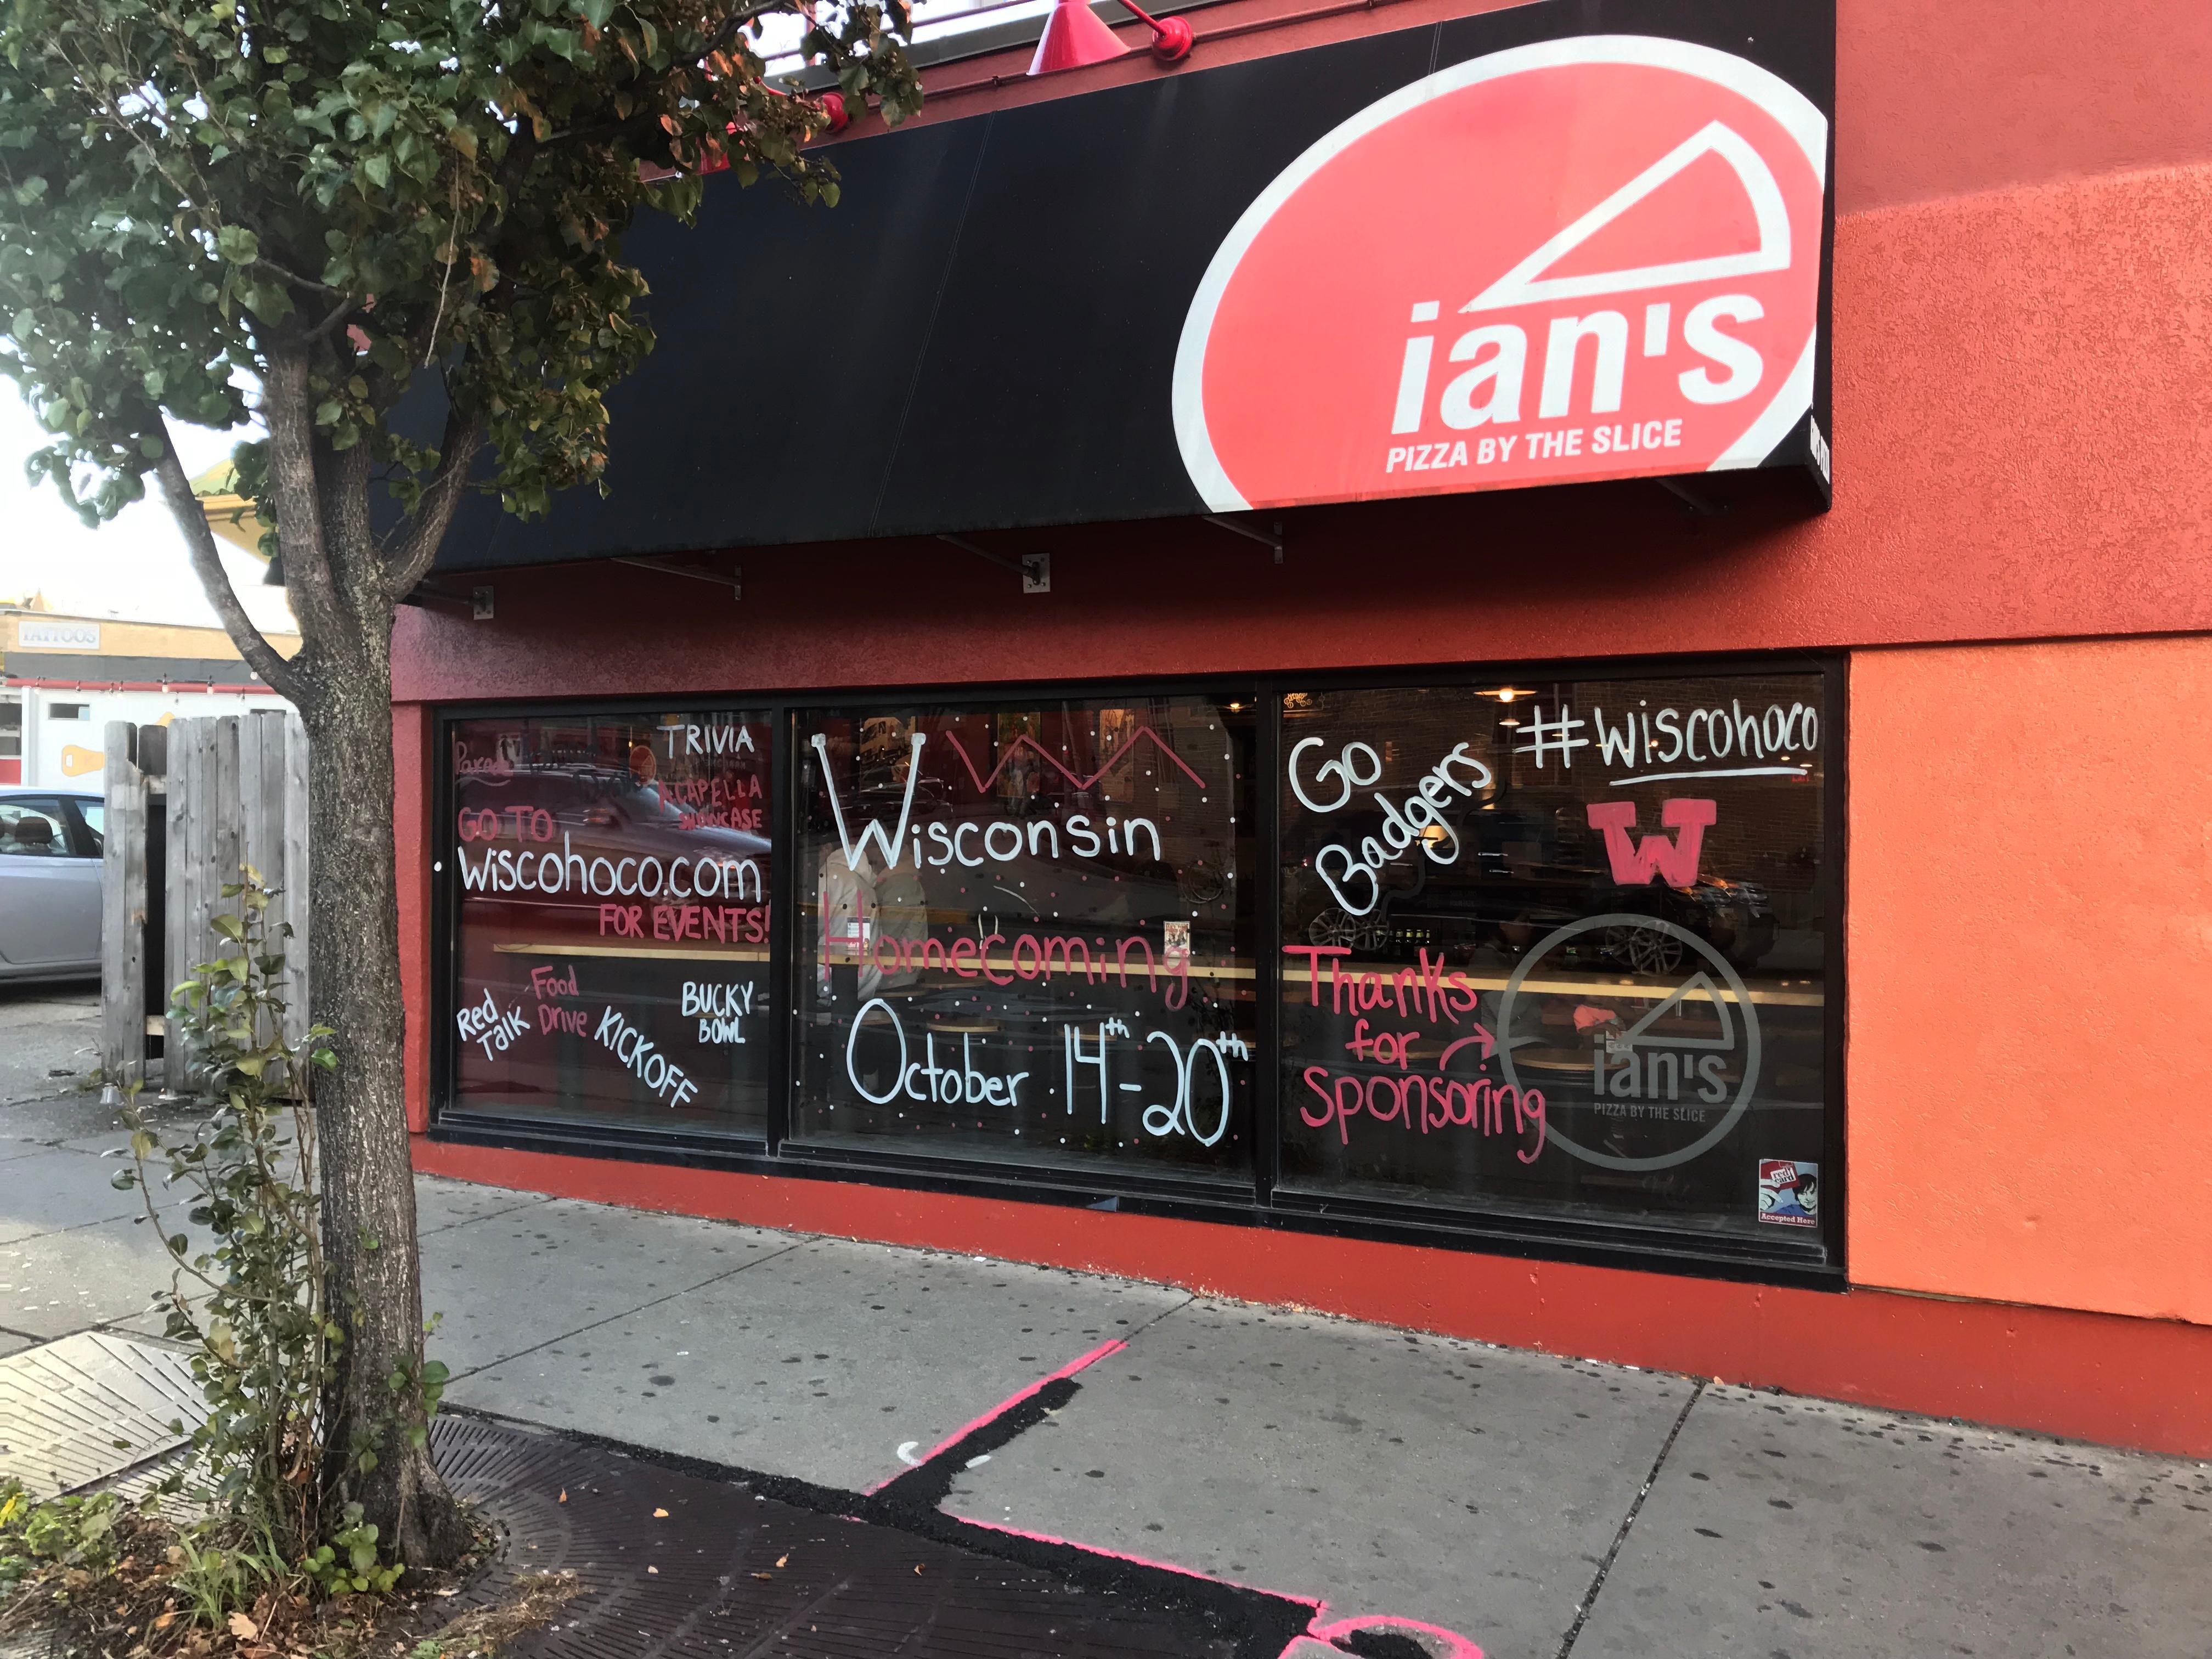 Ian's Pizza by the Slice